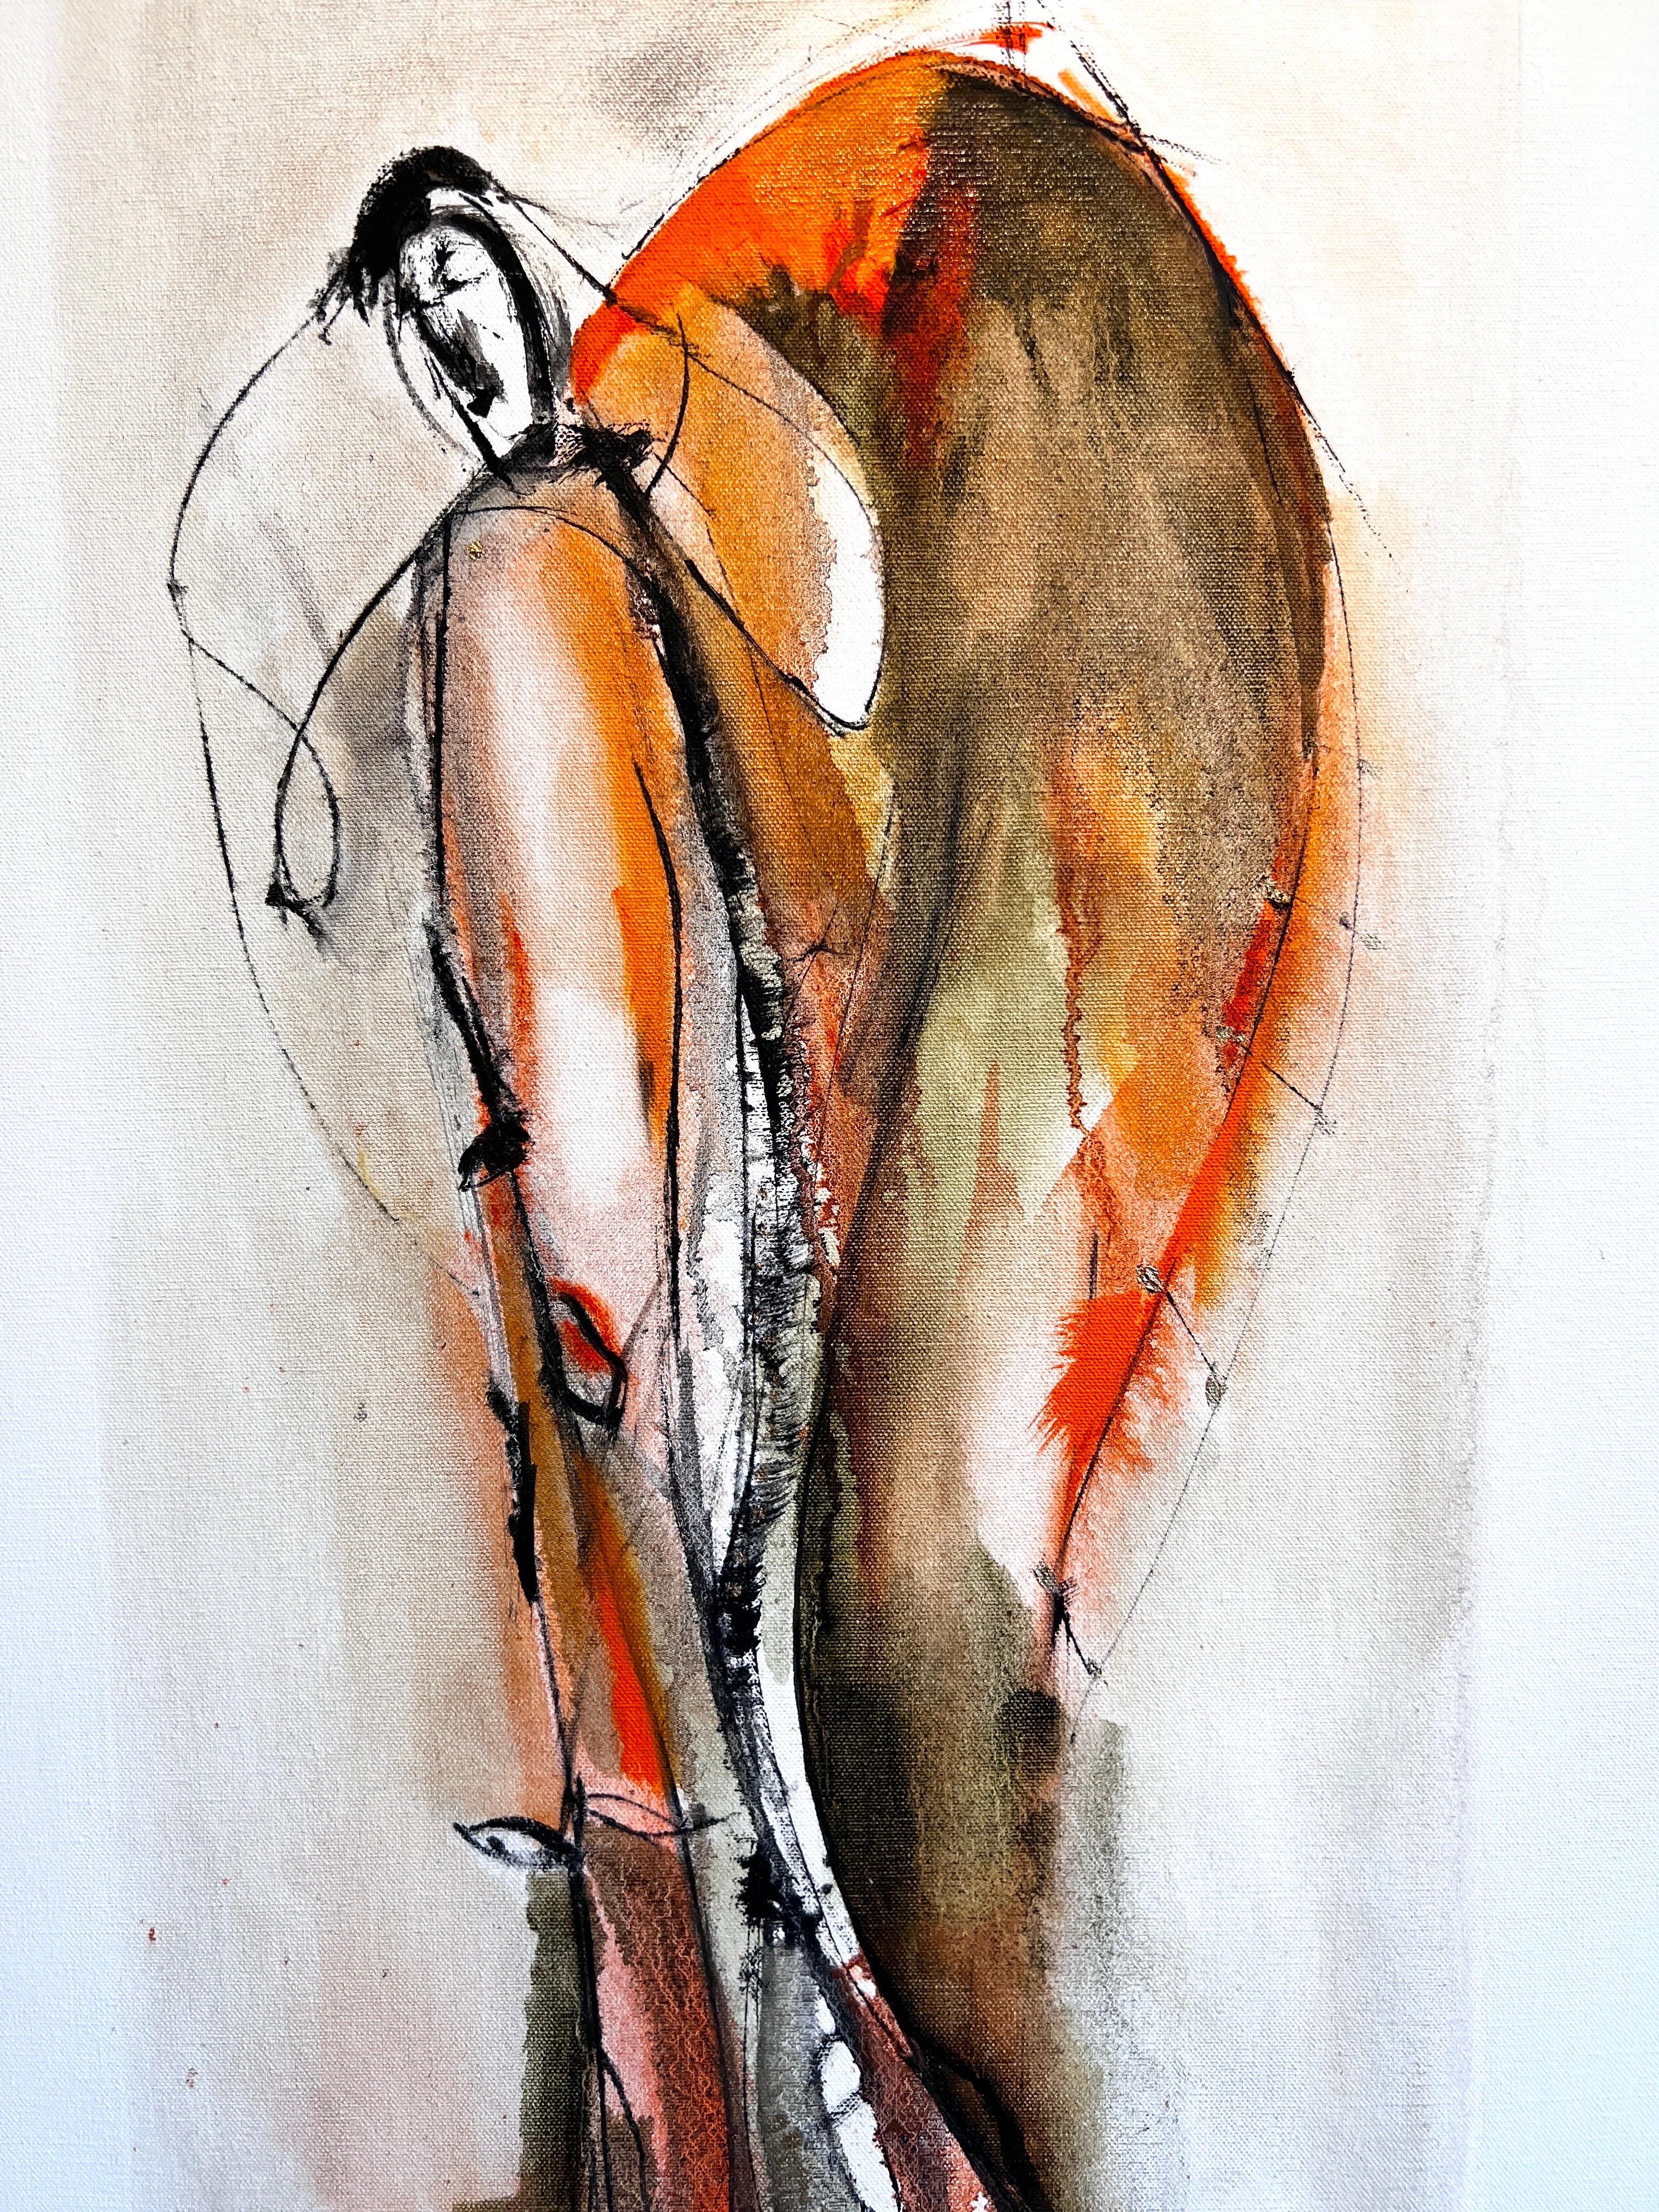 Abstract Figure, Abstract Figurative, Orange Abstract, Contemporary Figure.